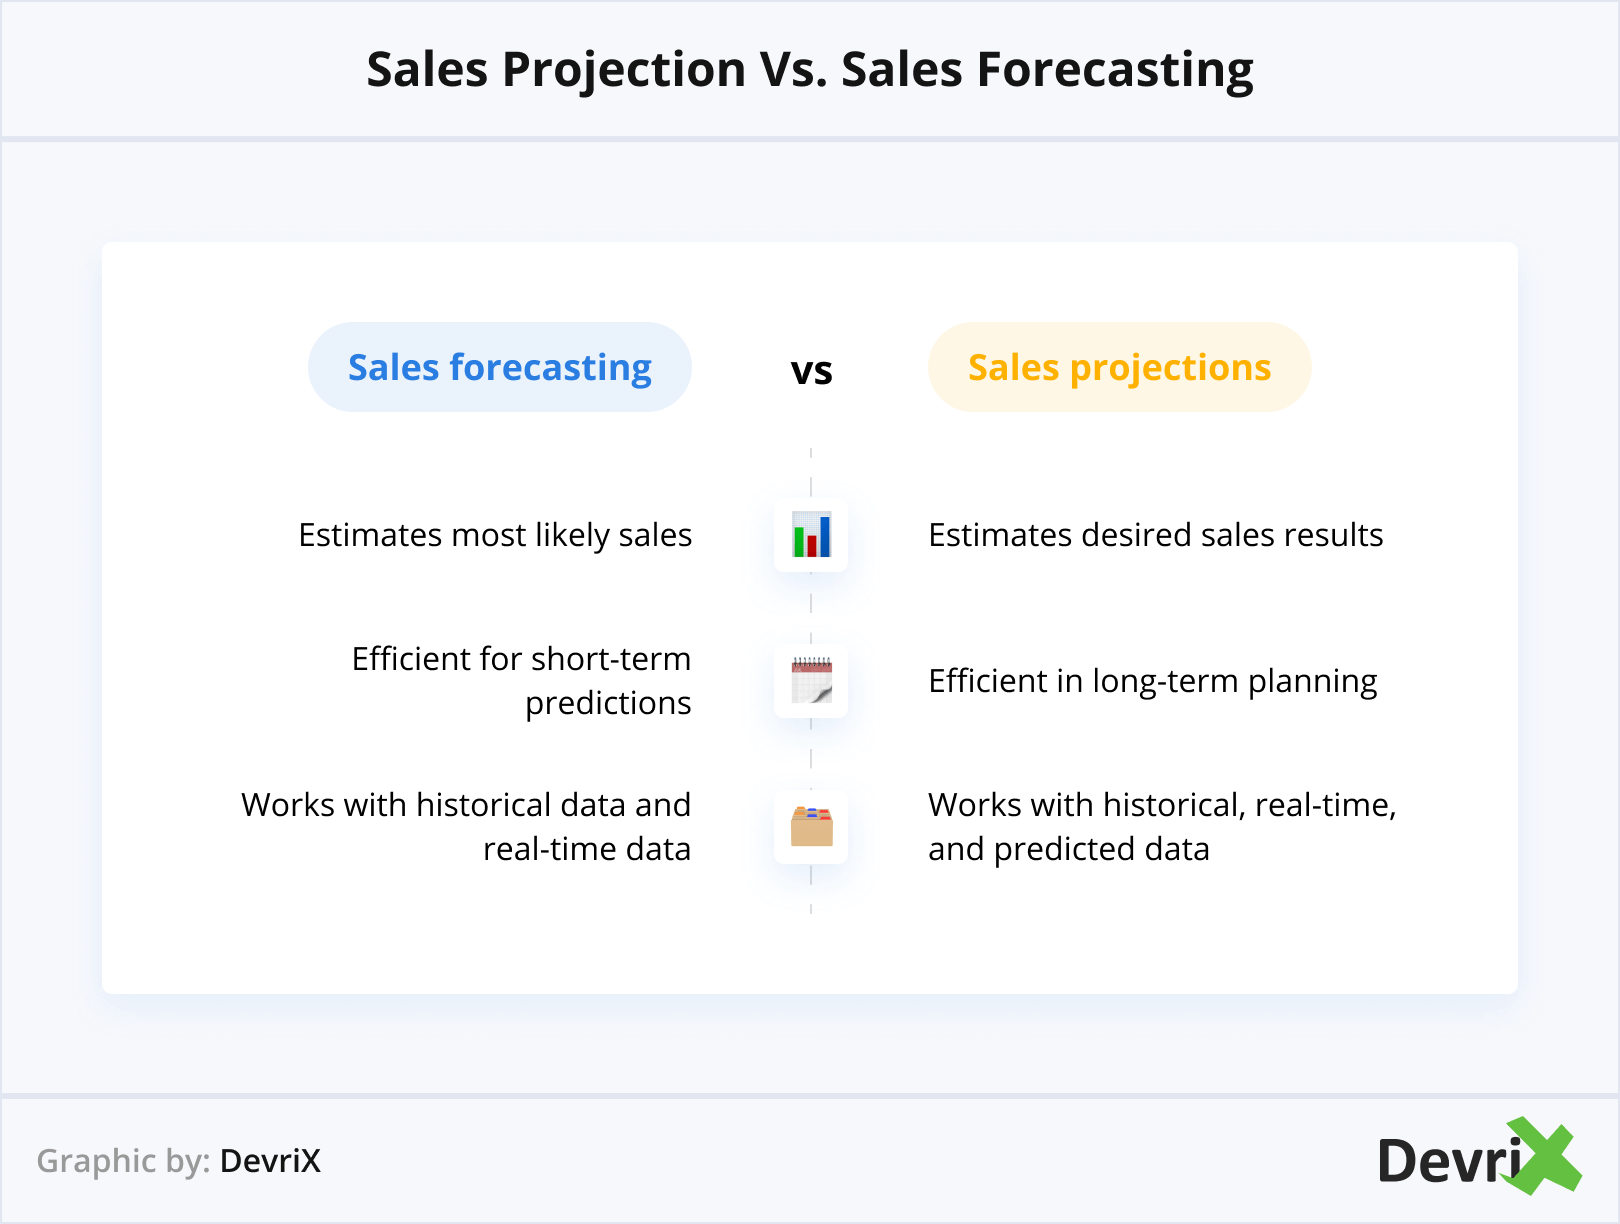 Sales Projection Vs. Sales Forecasting